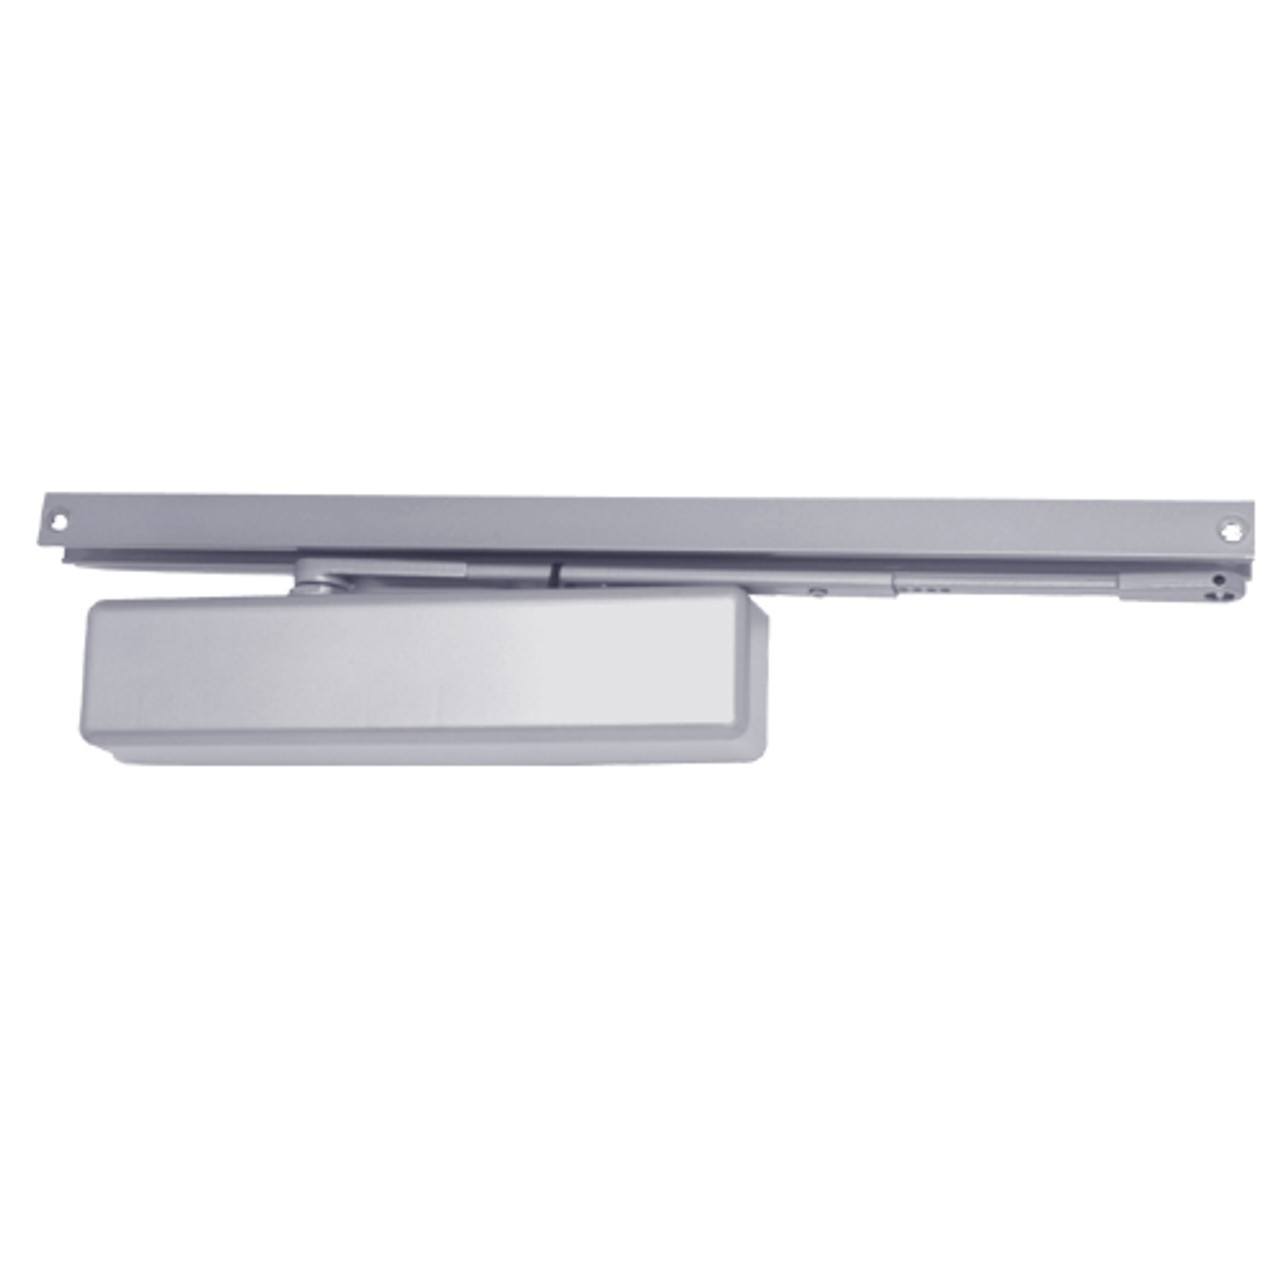 1460T-BUMPER-US26D-DS LCN Surface Mount Door Closer with Bumper Arm in Satin Chrome Finish